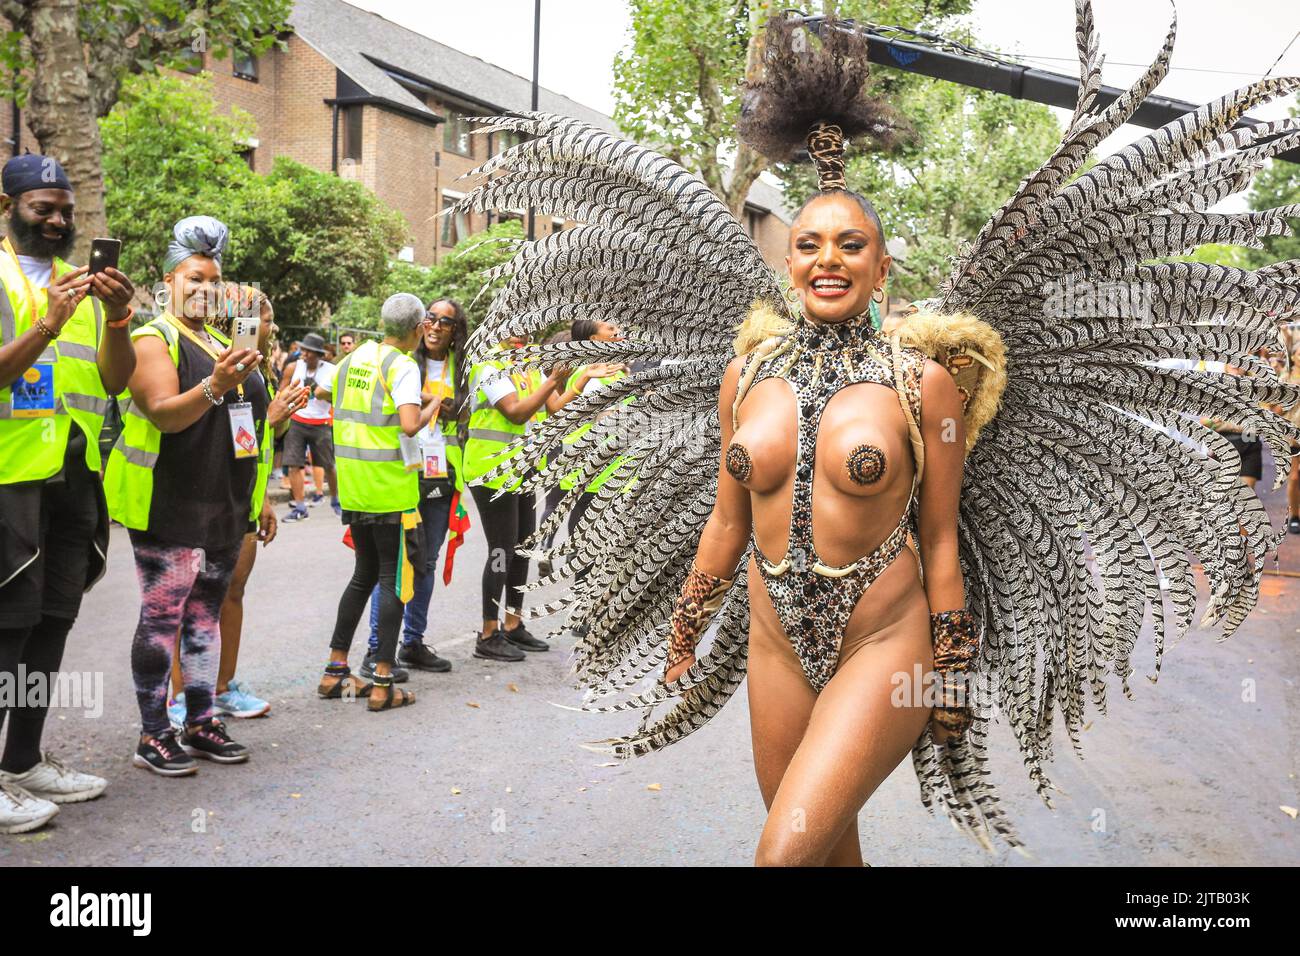 London, UK. 29th Aug, 2022. Participants and revellers have fun along the main parade at Notting Hill Carnival 2022. The carnival, a celebration of Caribbean culture, returns to London after 2 years of restrictions and is expected to easily exceed 1 million visitors again this year. Credit: Imageplotter/Alamy Live News Stock Photo